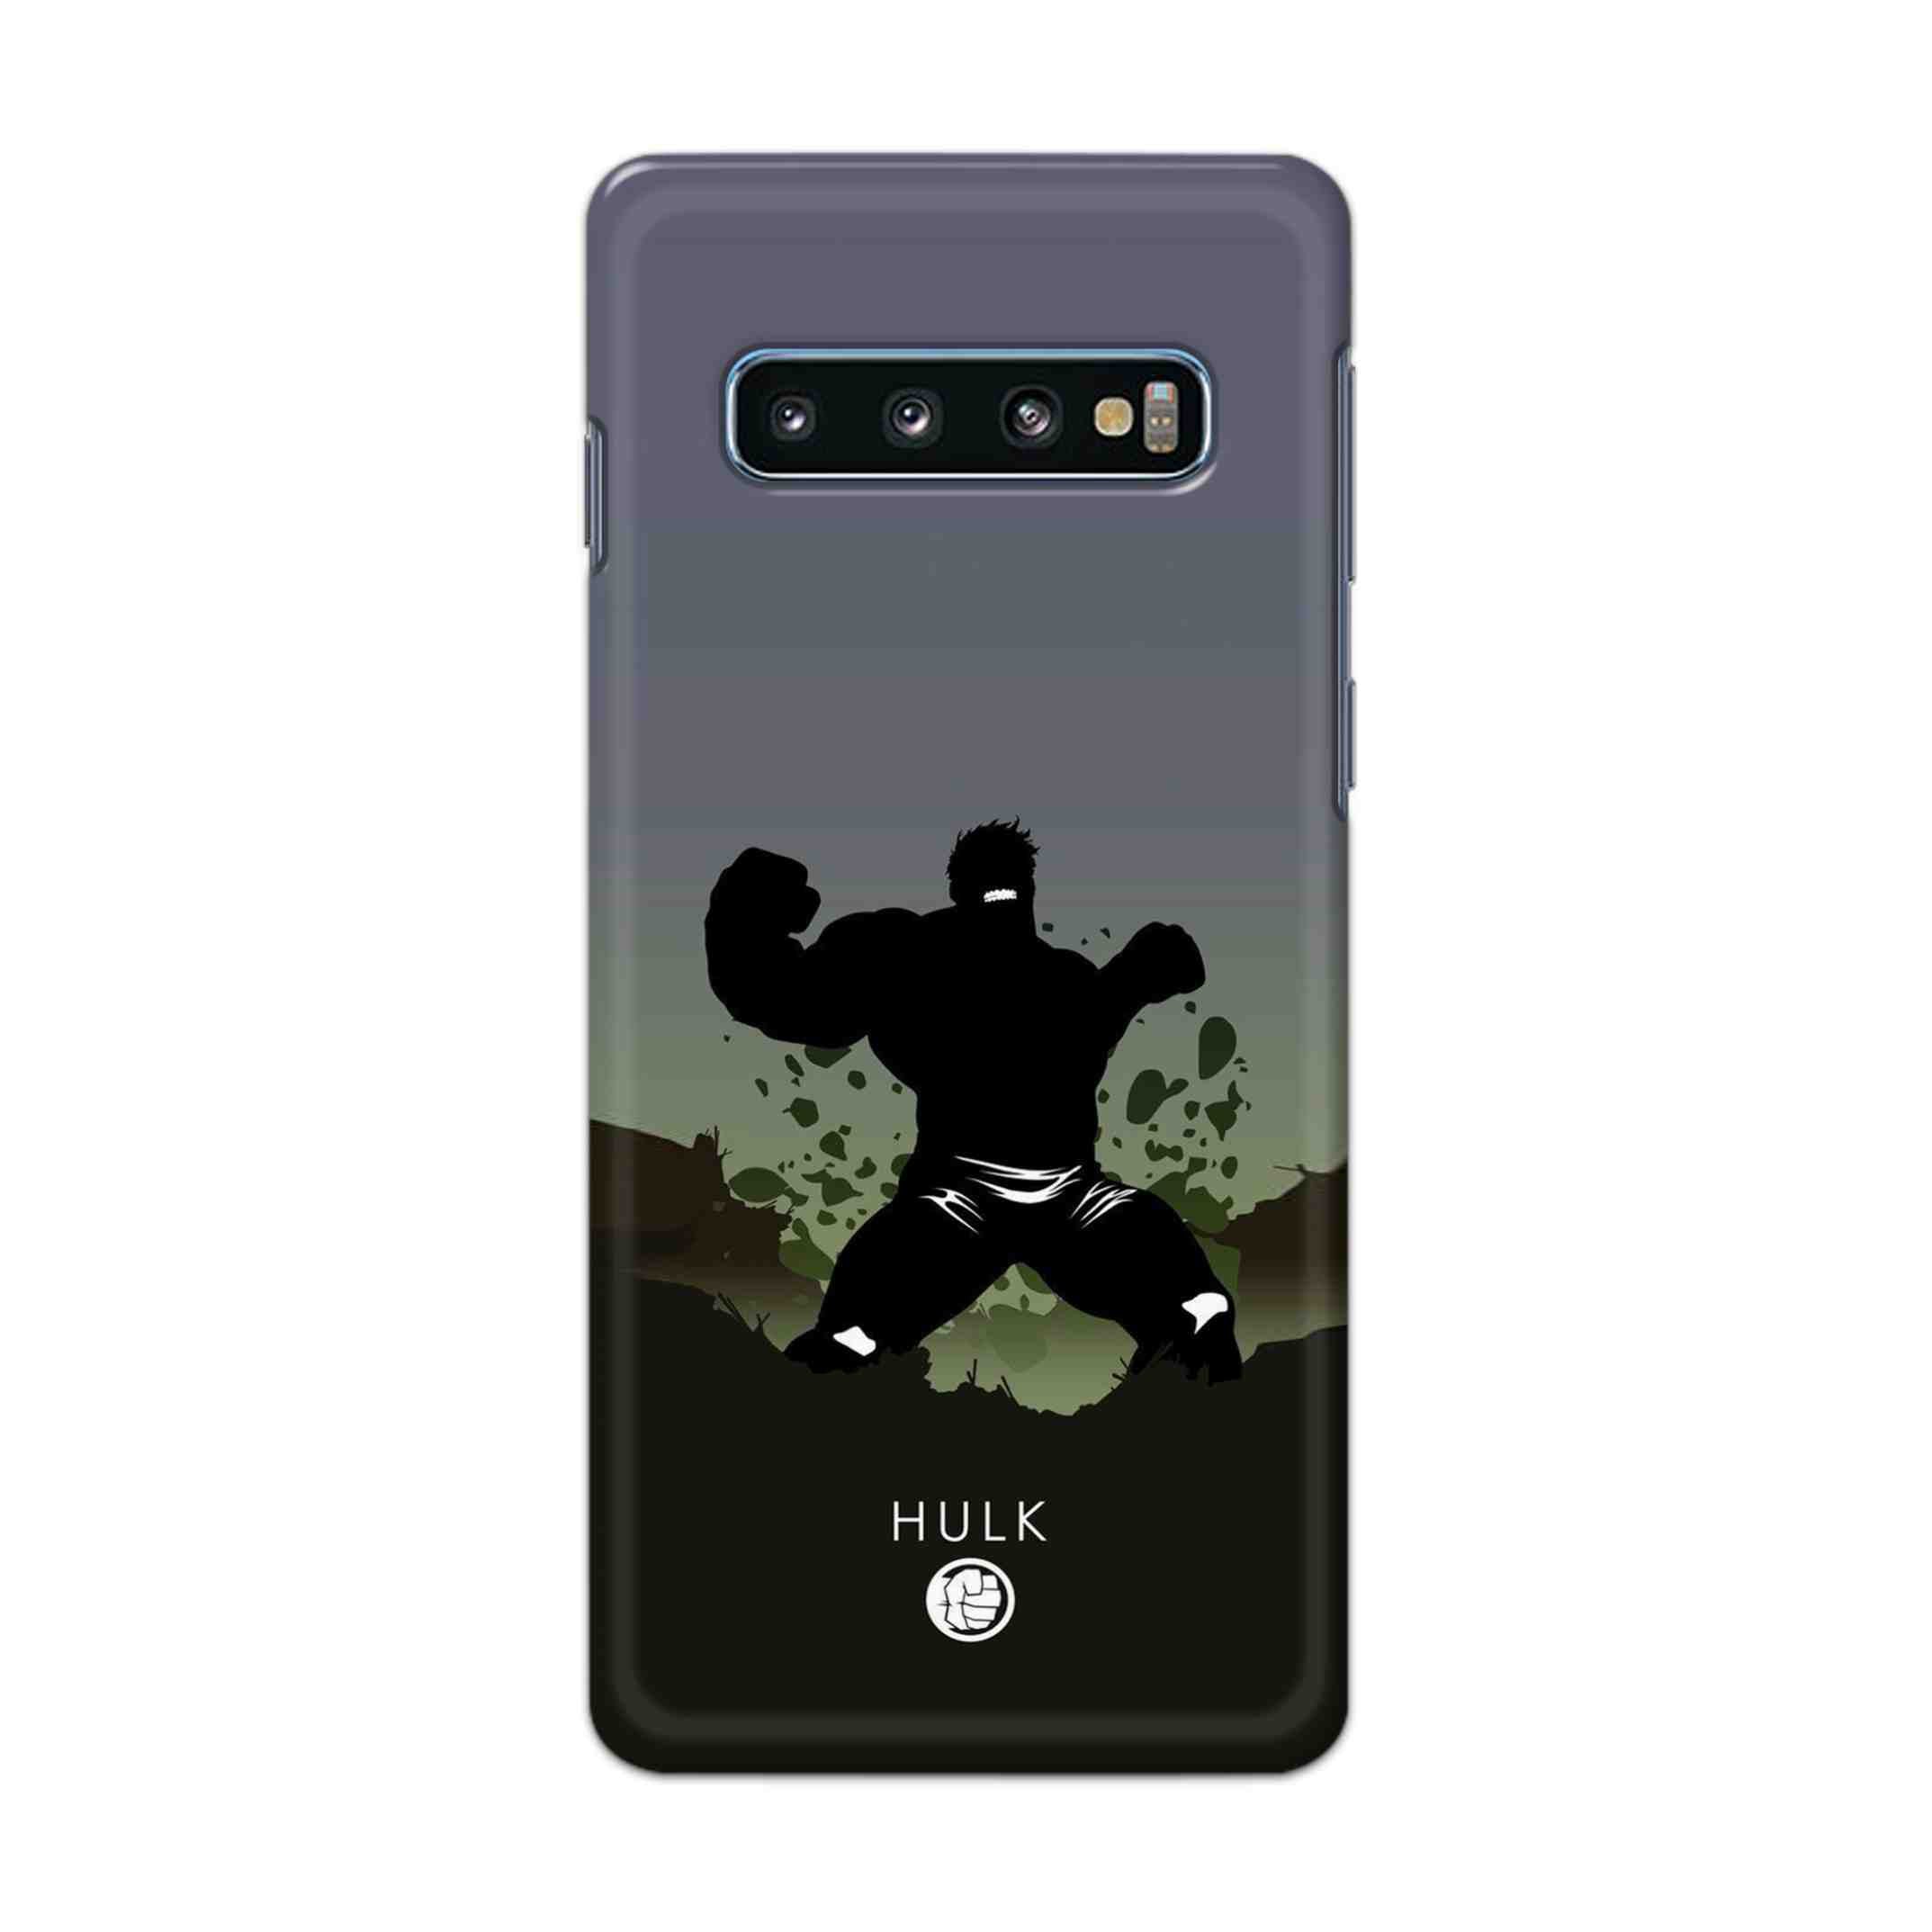 Buy Hulk Drax Hard Back Mobile Phone Case Cover For Samsung Galaxy S10 Plus Online